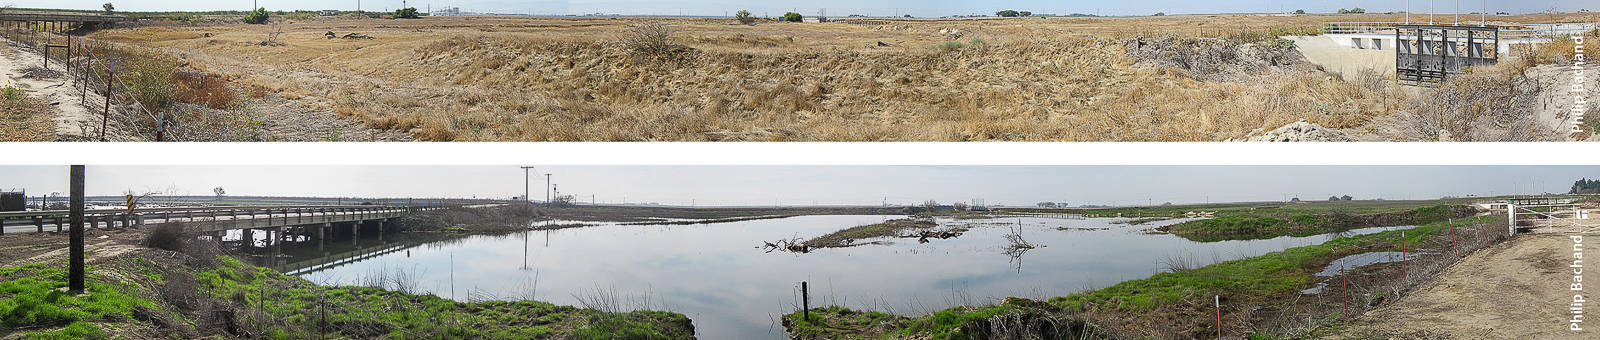 Panoramic picture of the James Bypass from the Terranova Ranch in October 2010 (top) and early February 2011 (below) from the Highway 145 overpass to the James Weir. Flood flows occur approximately on a 2-year interval, but the James Bypass can be dry for years at a time or flooded for several months consecutively.